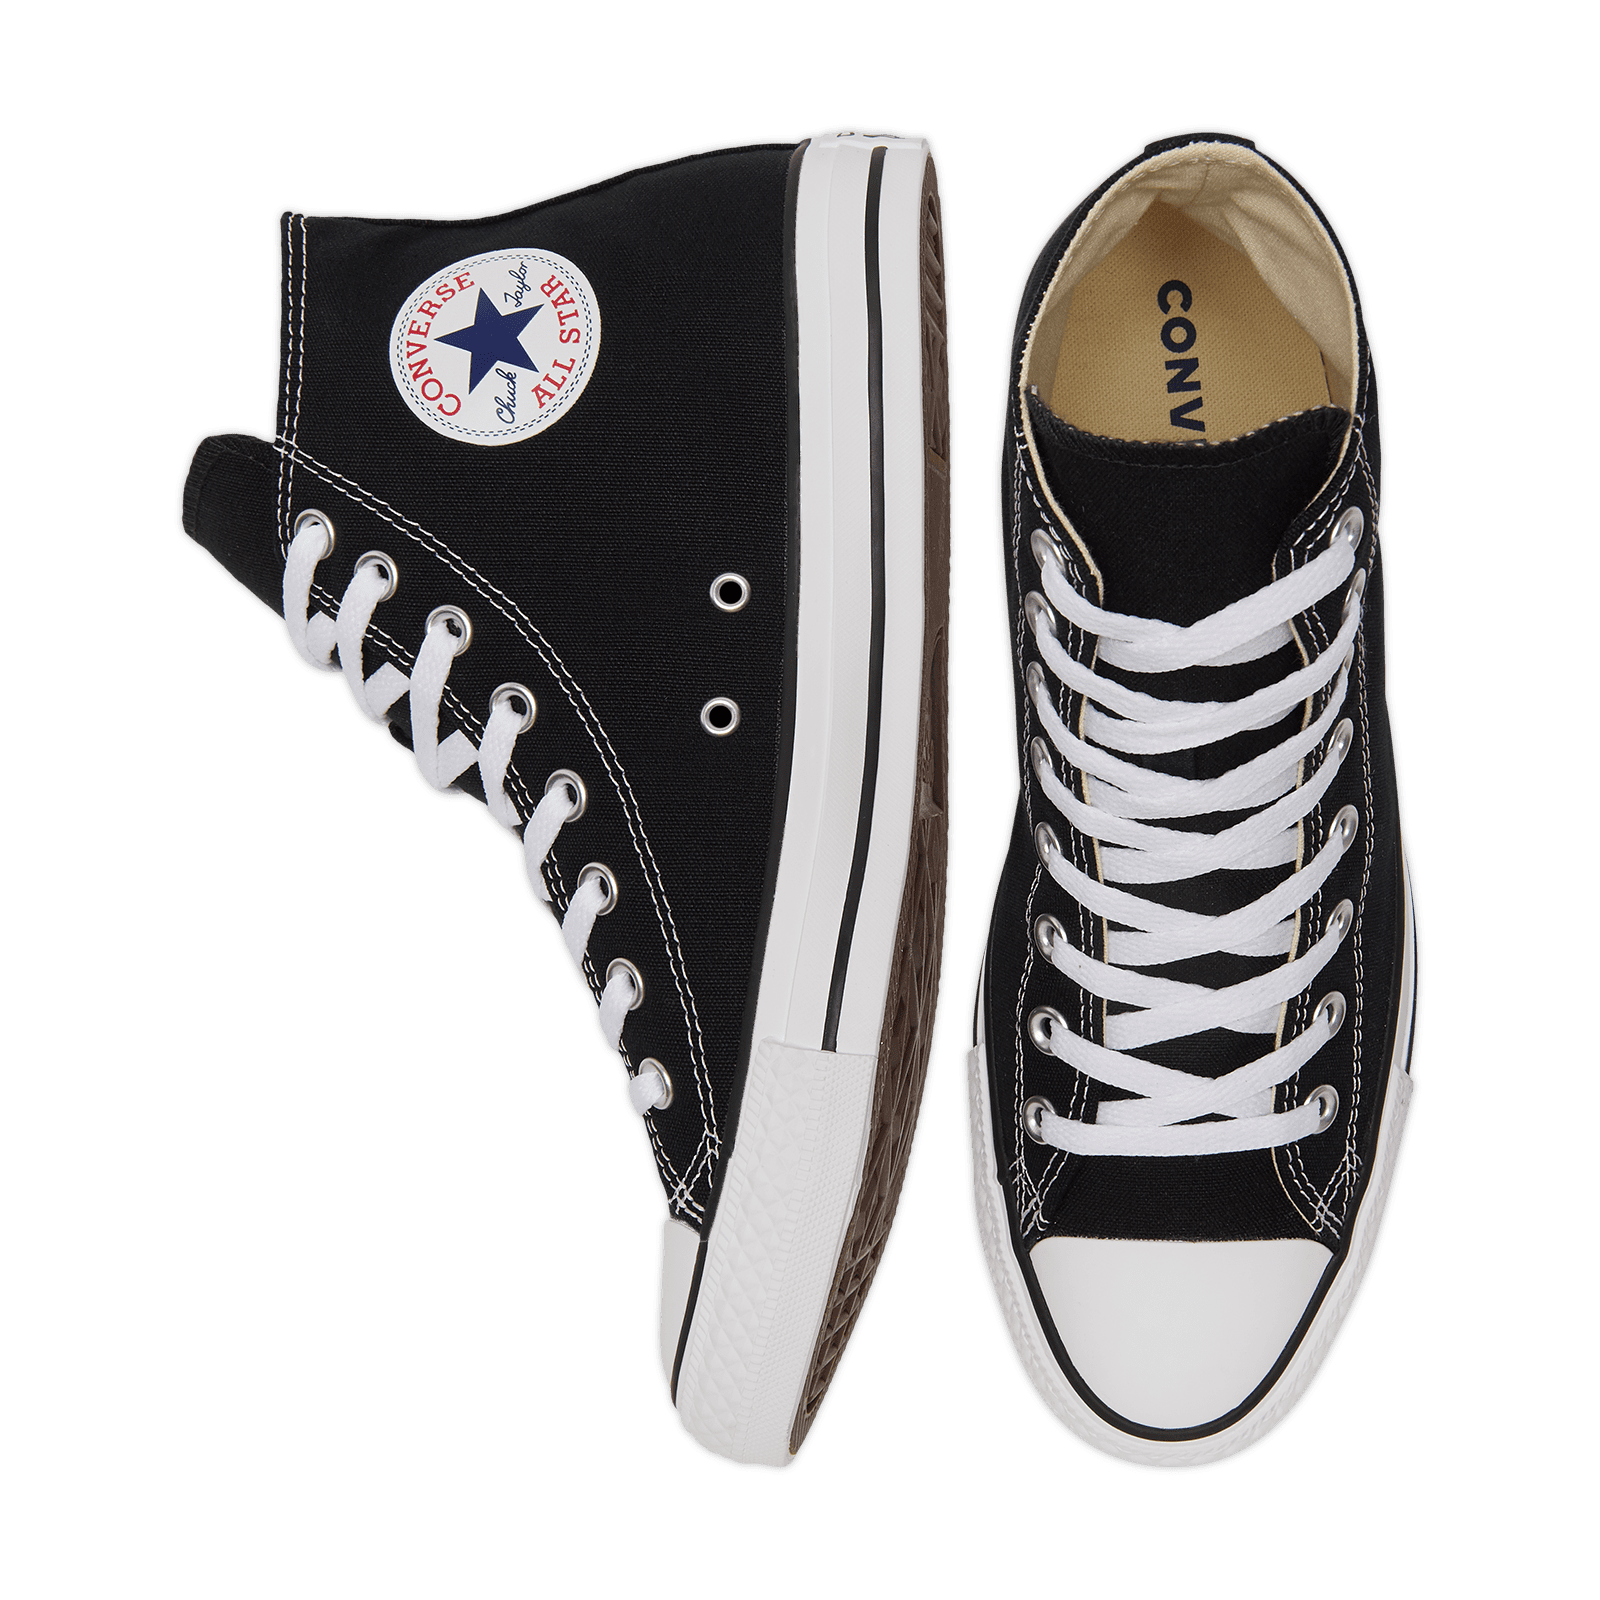 Buy Womens CONVERSE Chuck Taylor All Star High Top Canvas Shoes Black  Online at Lowest Price in Ubuy Ethiopia. 504376917